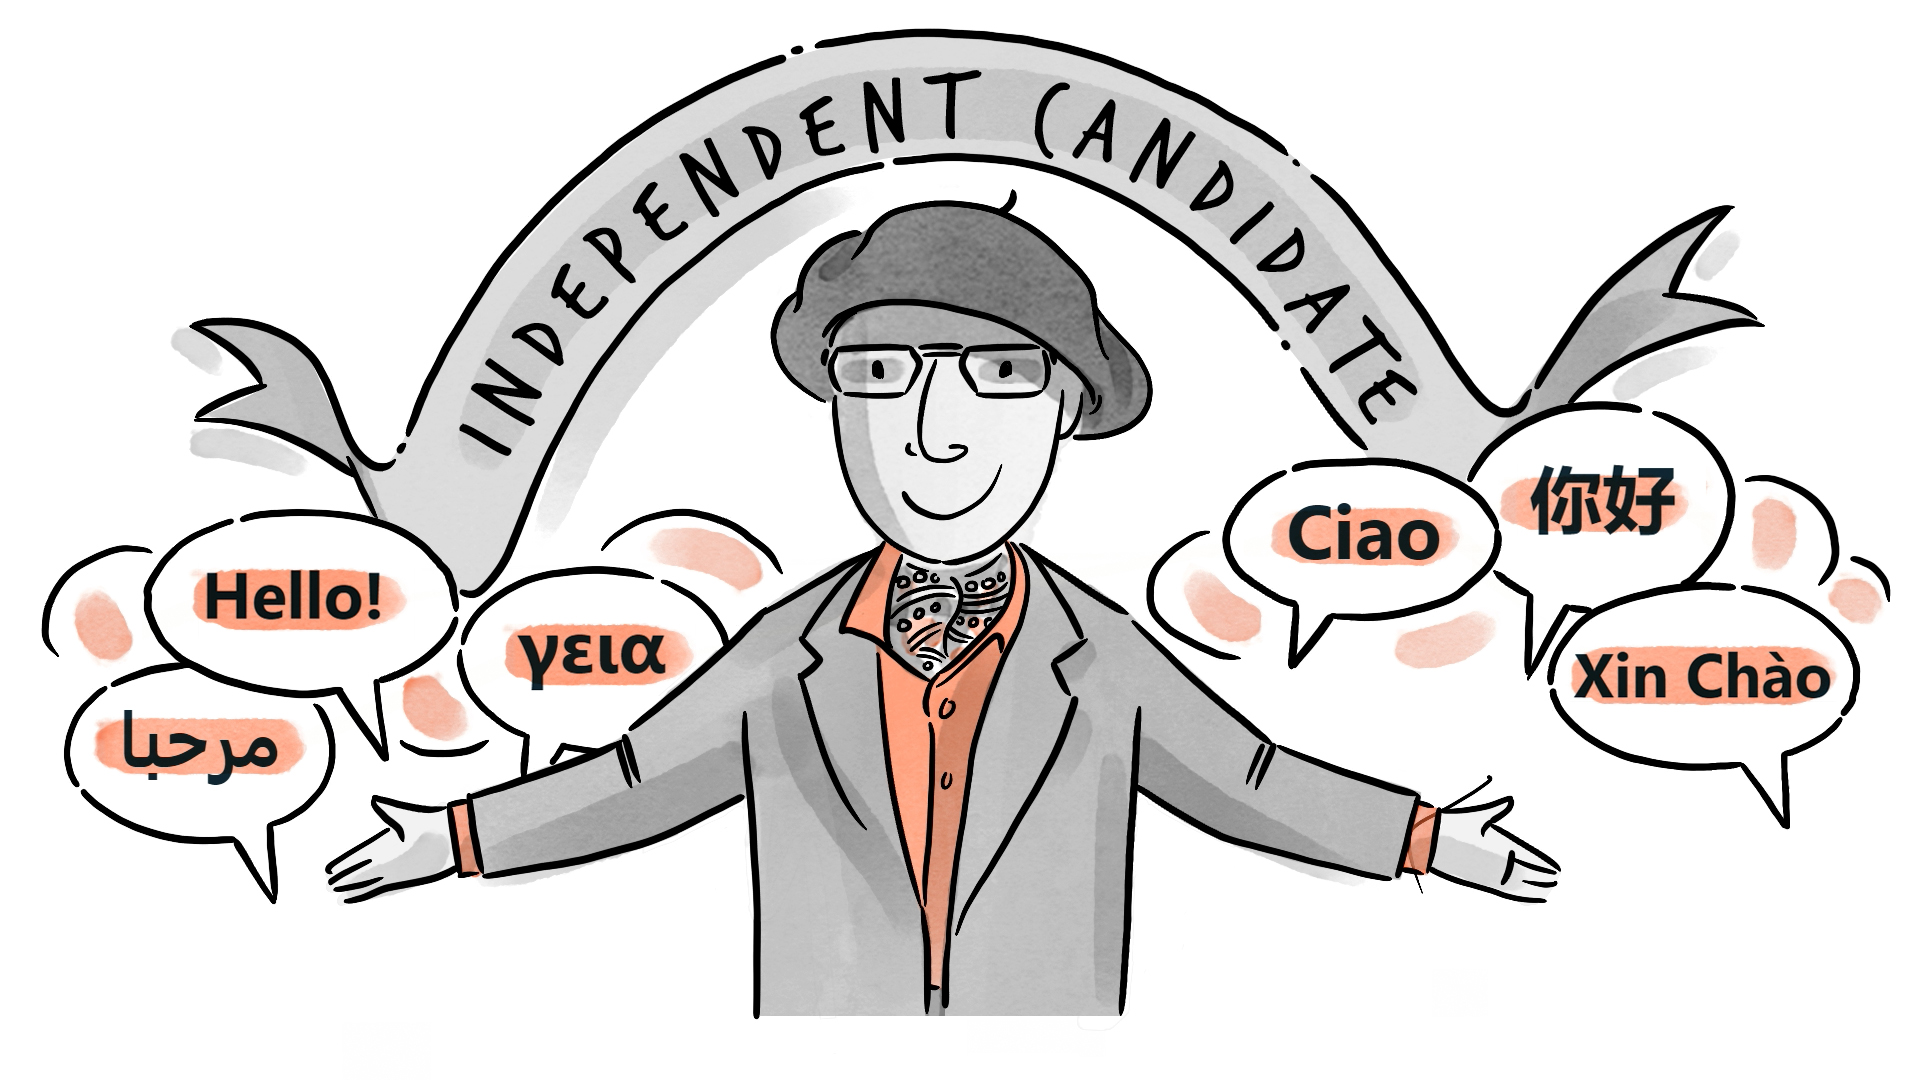 An illustration of Gaetano Greco, surrounded by a number of speech bubbles all saying "Hello" in different languages. A banner above him reads "Independent Candidate"